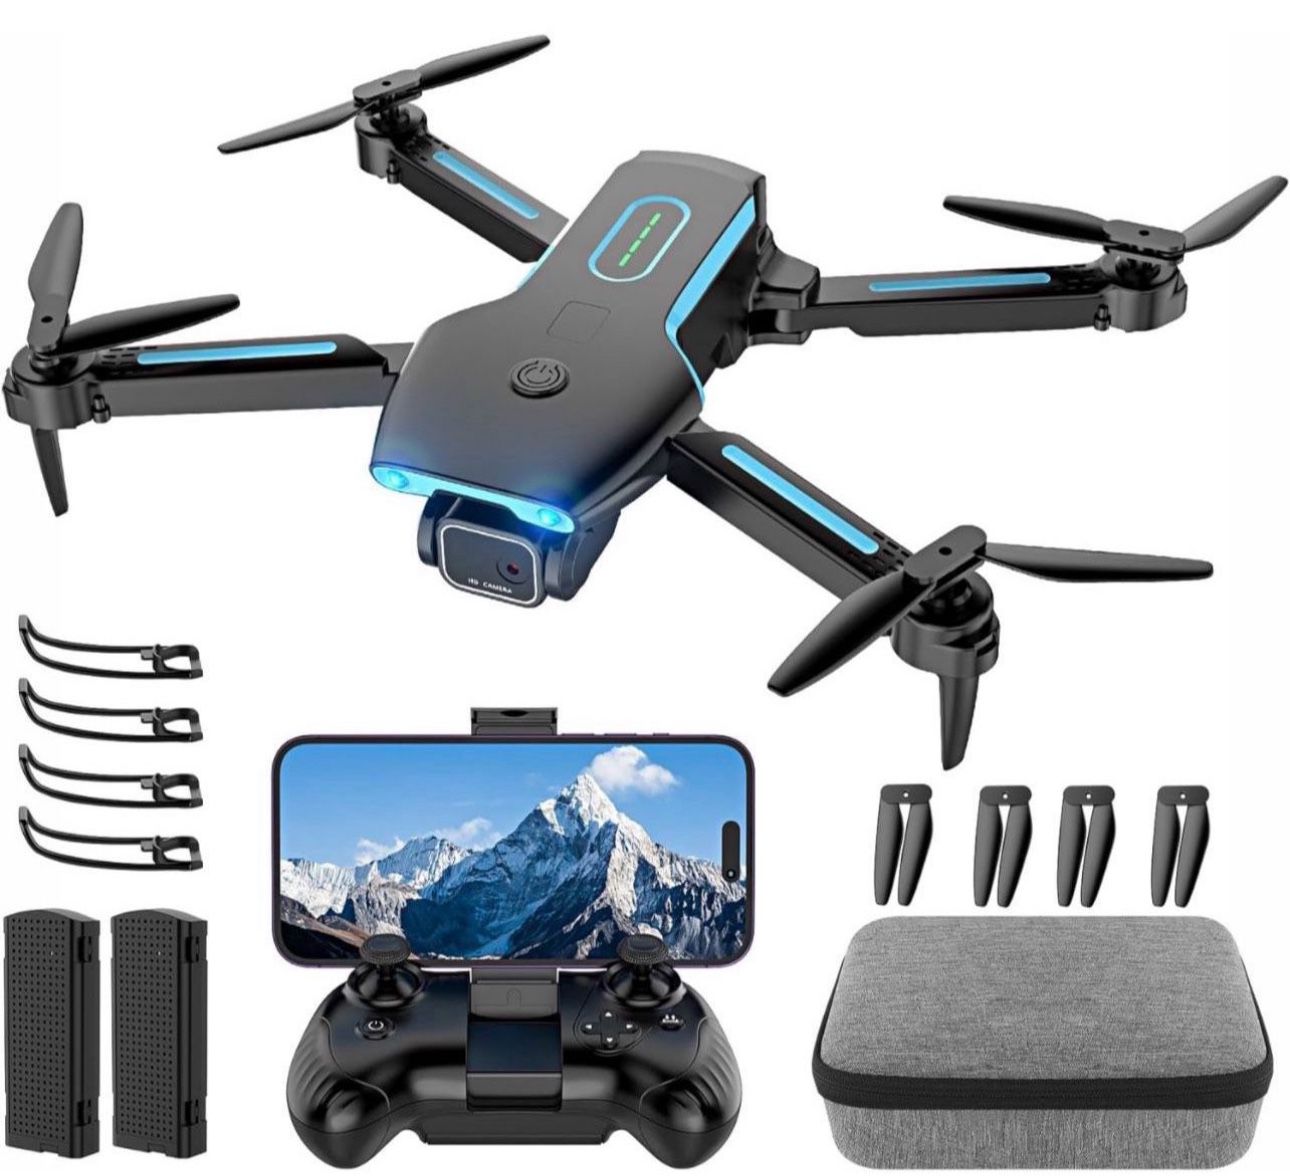 Drone with 1080P HD FPV Camera, RC Aircraft Quadcopter with Headless,3D Flips, One Key Start, Voice/Gravity Control, Speed Adjustment, 2 Batteries, Fo